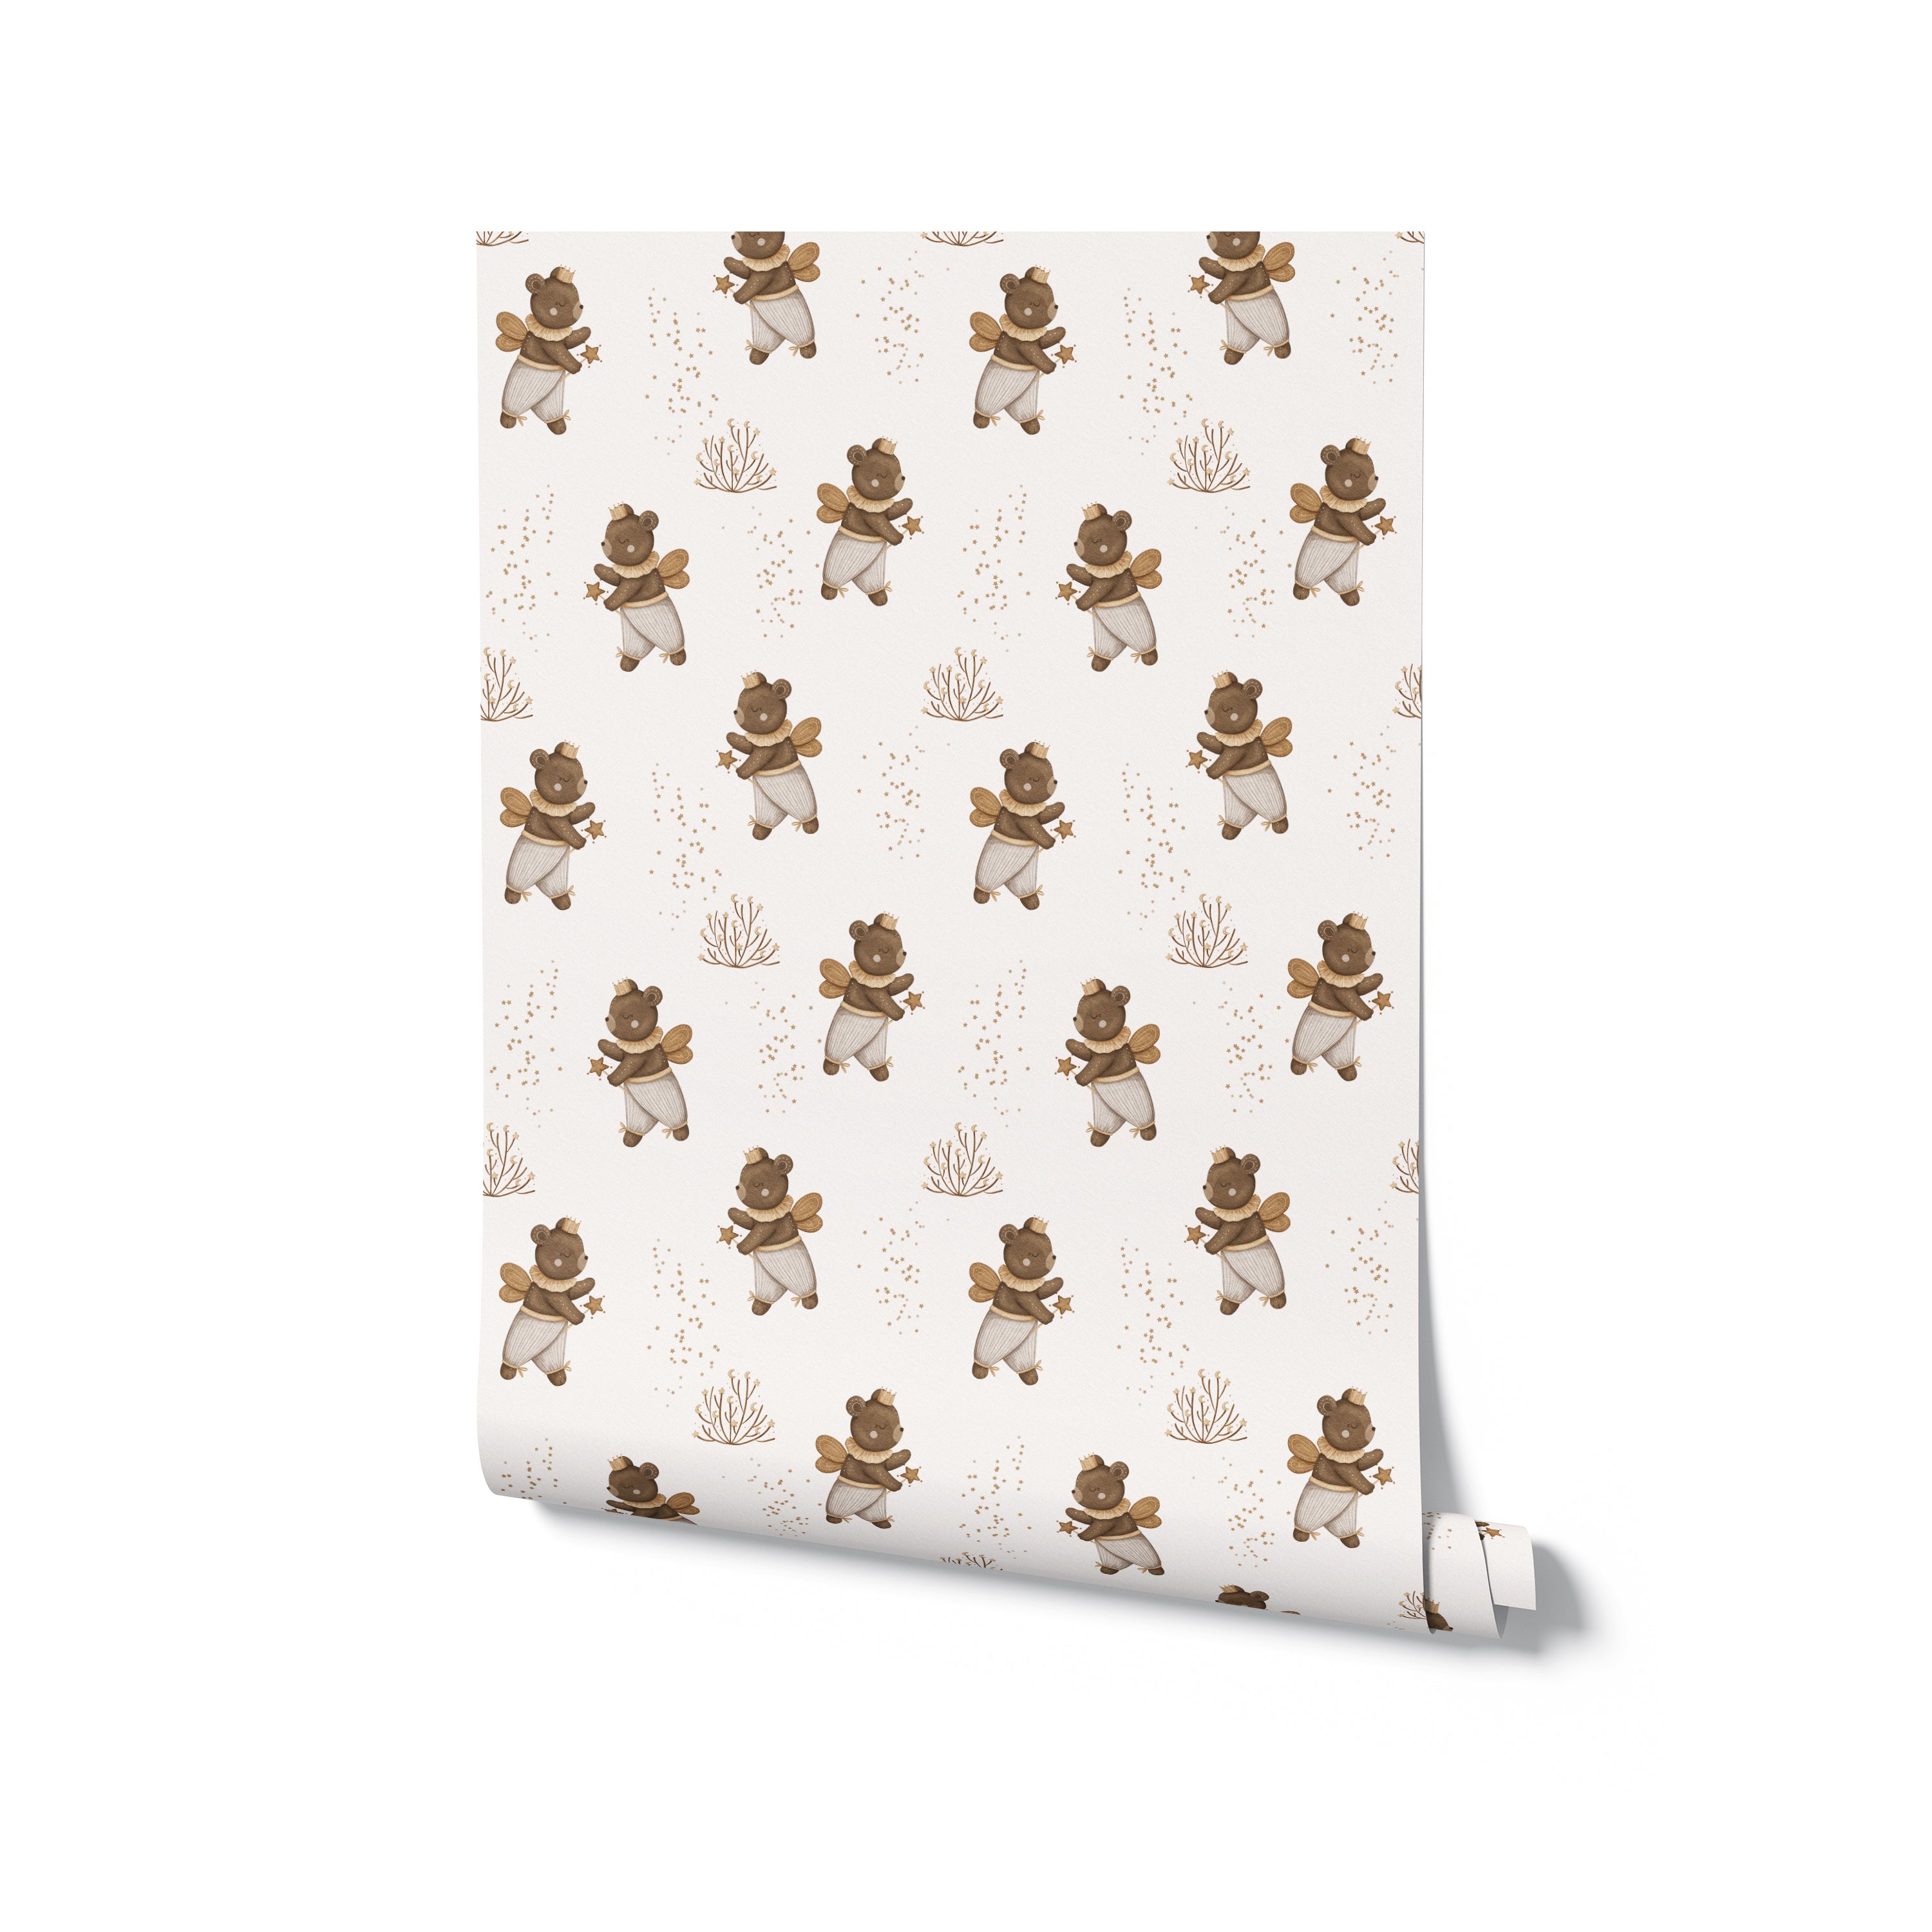 A rolled panel of Stardust Bears Wallpaper displaying a delightful pattern of crowned bears with wings, perfect for adding a magical touch to any nursery.